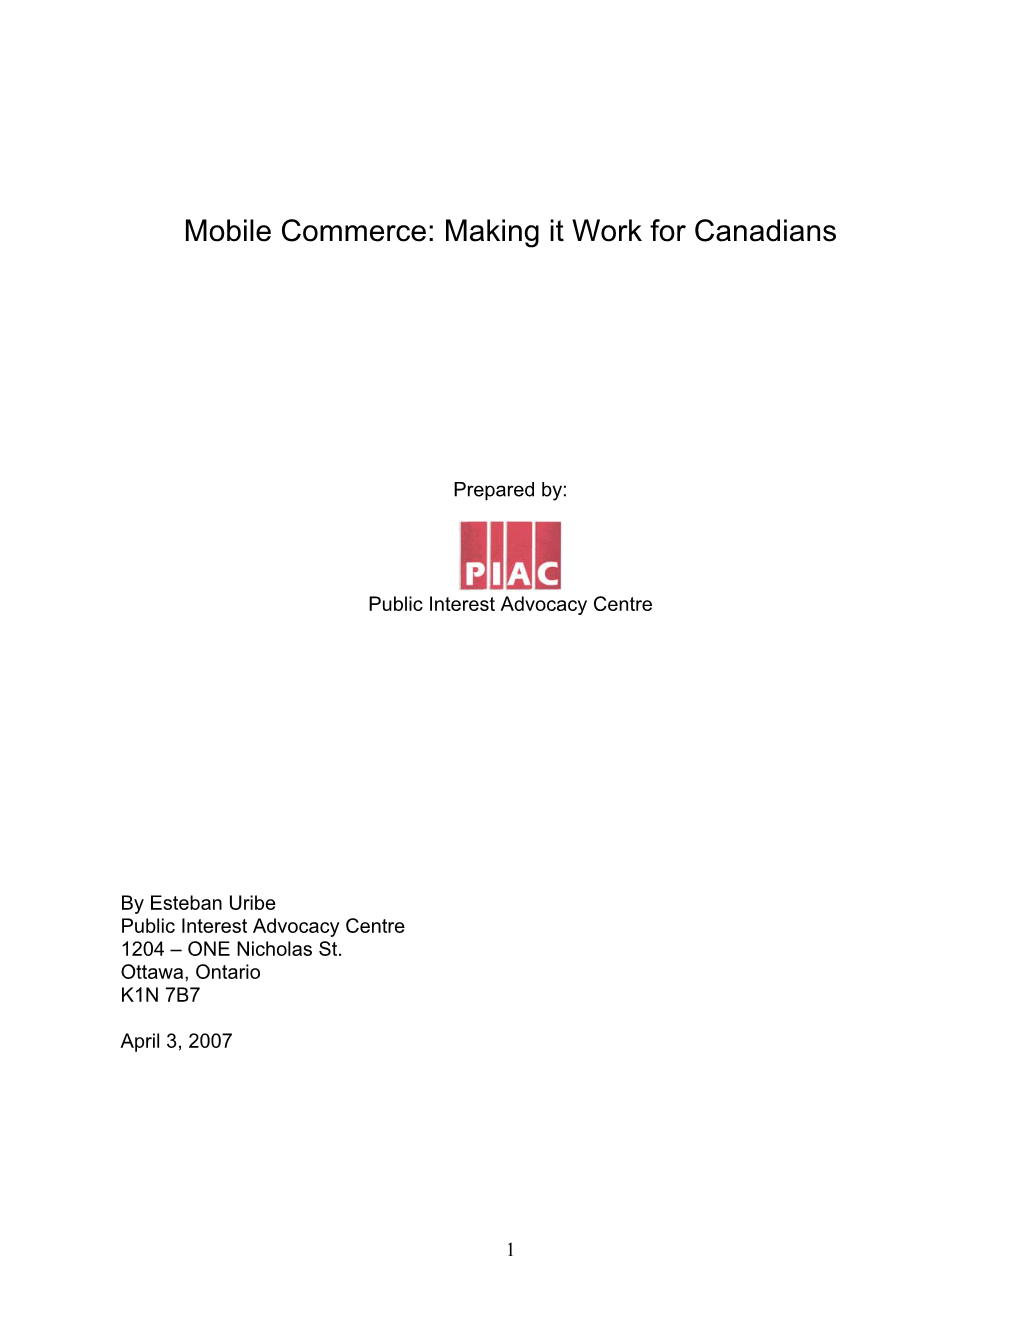 Mobile Commerce: Making It Work for Canadians